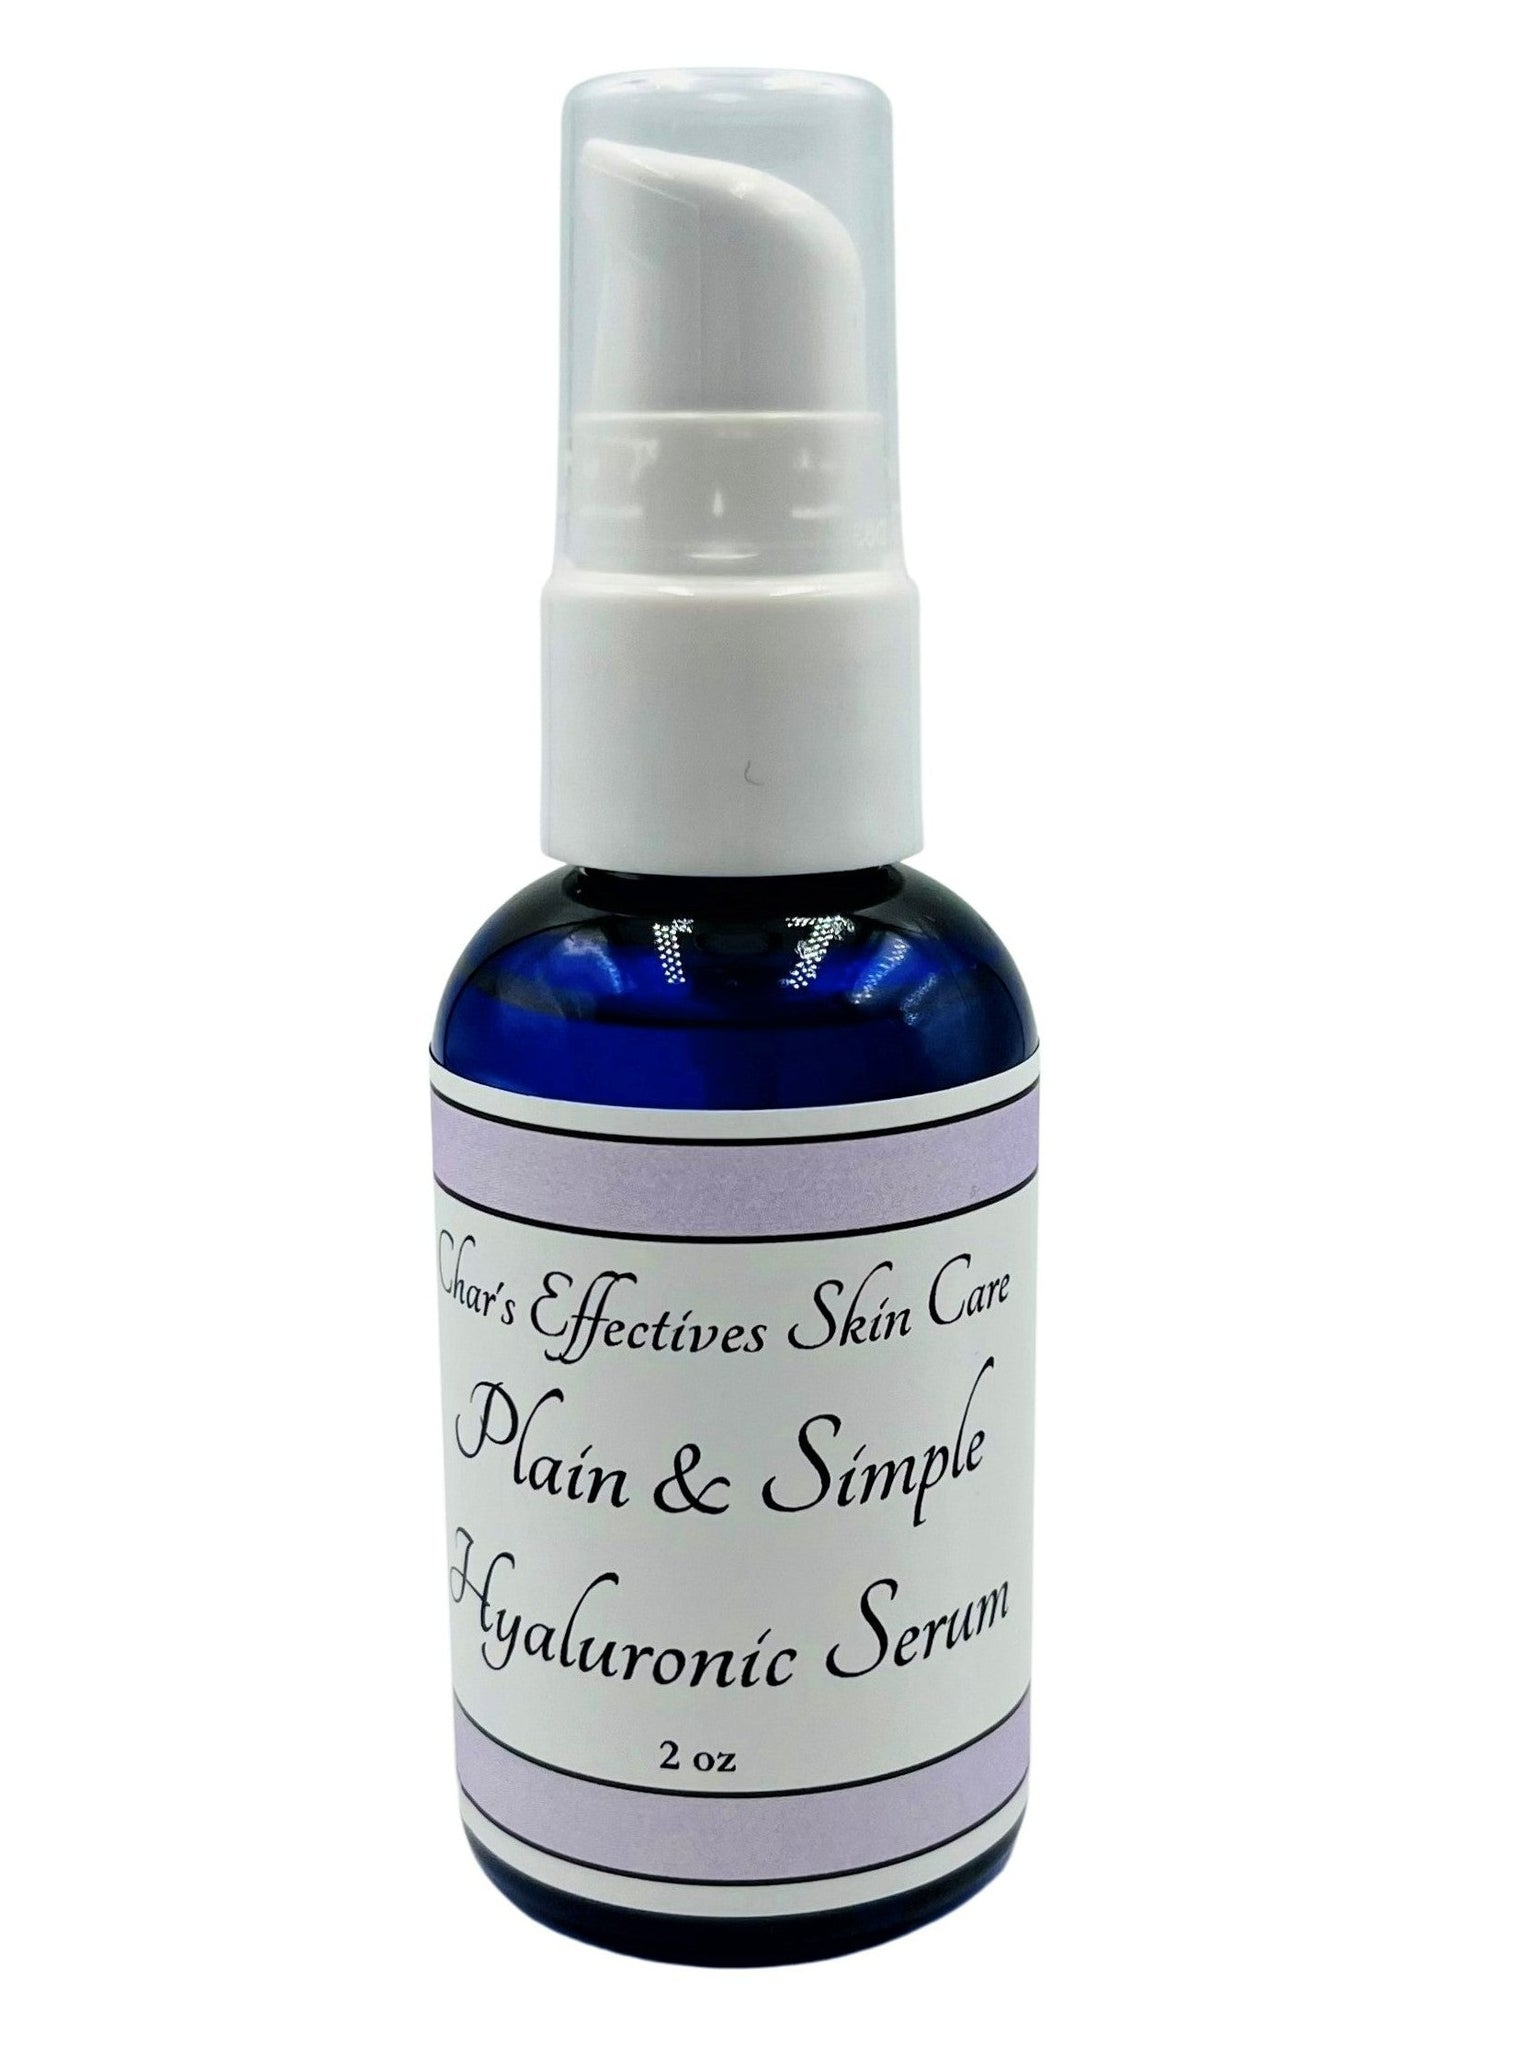 Plain & Simple Hyaluronic Serum/ affordable great value in 2 ounce size blue bottle with white treatment pump/ Char's Effectives!